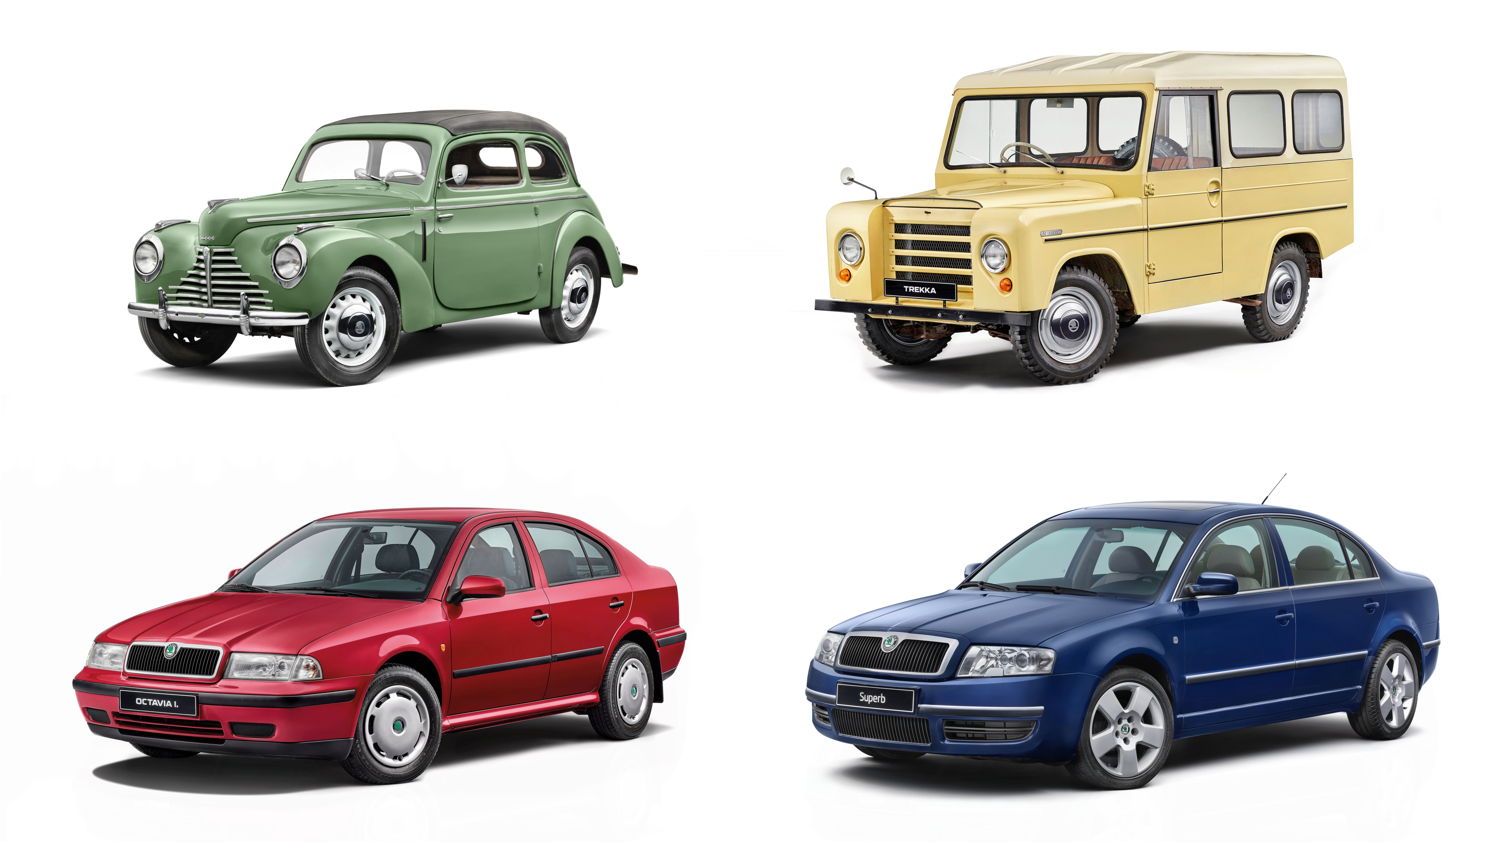 In the coming year, important ŠKODA models will be
celebrating key anniversaries: the ŠKODA 1101/1102 “Tudor”
was released 75 years ago and the off-road TREKKA 55
years ago. The 25th anniversary of the production launch for
the first OCTAVIA of the modern era will be in 2021, and the
SUPERB will be able to look back on a 20-year history.